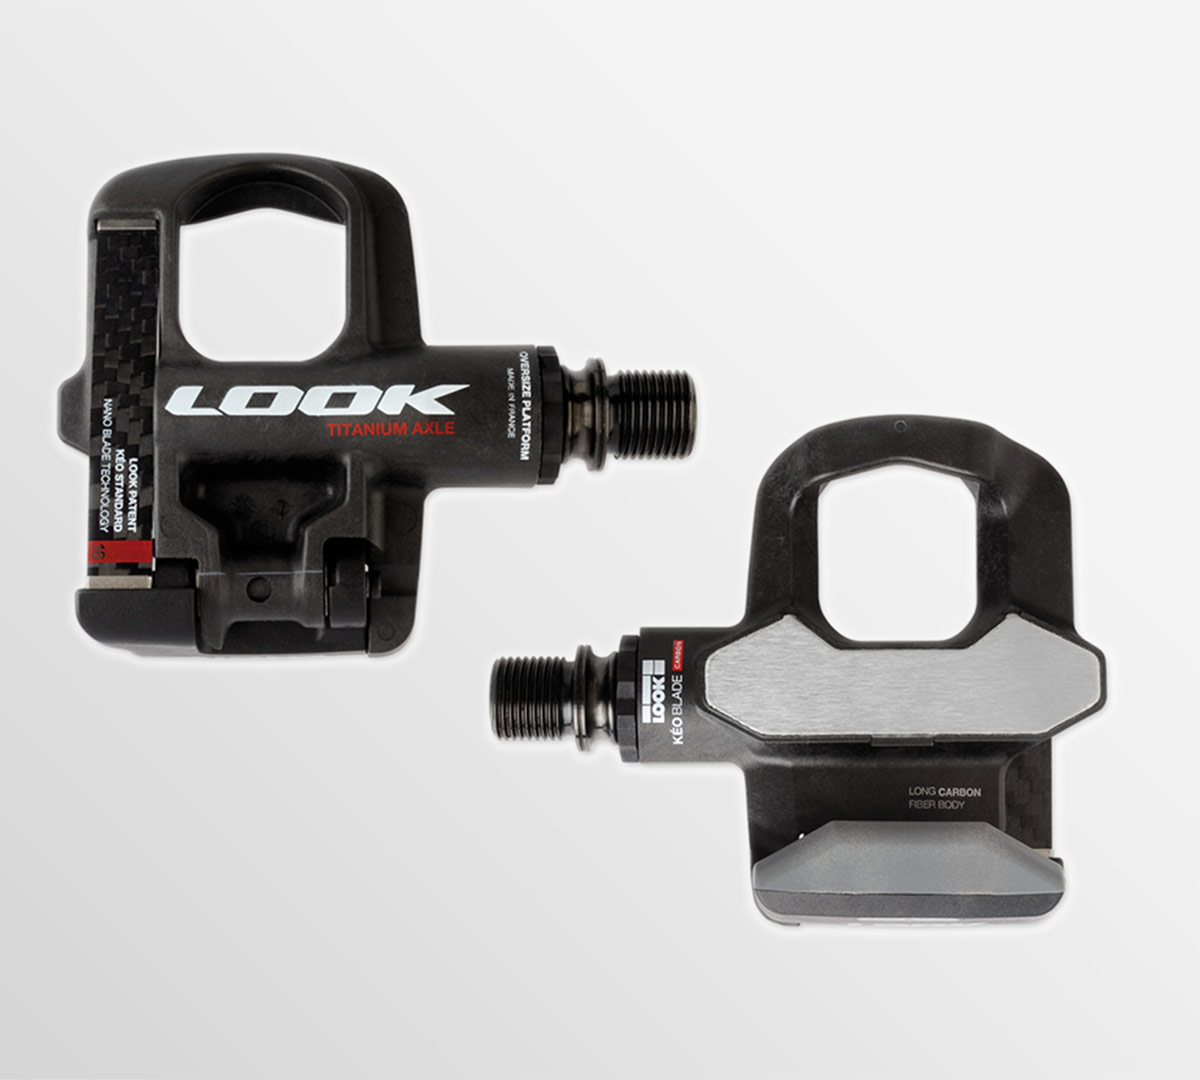 Look Keo Blade Carbon Ti Pedals Review | Gearist